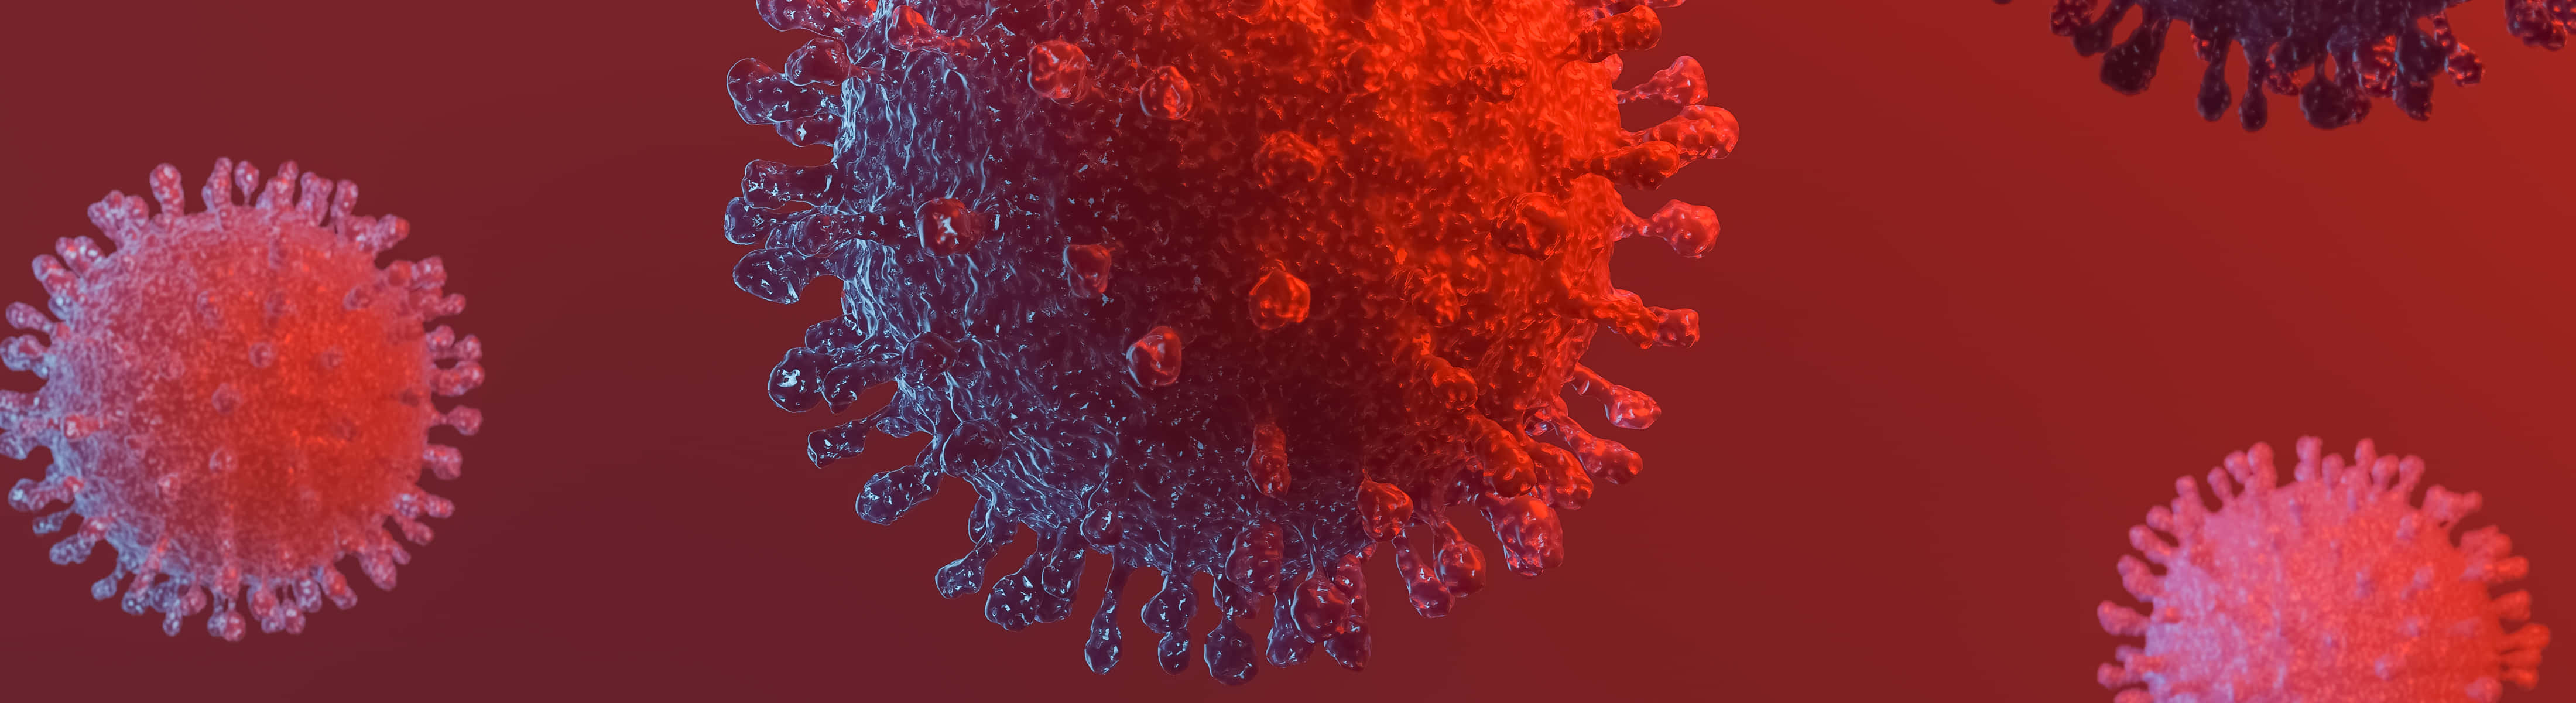 Coronaviruses In A Red And Blue Background